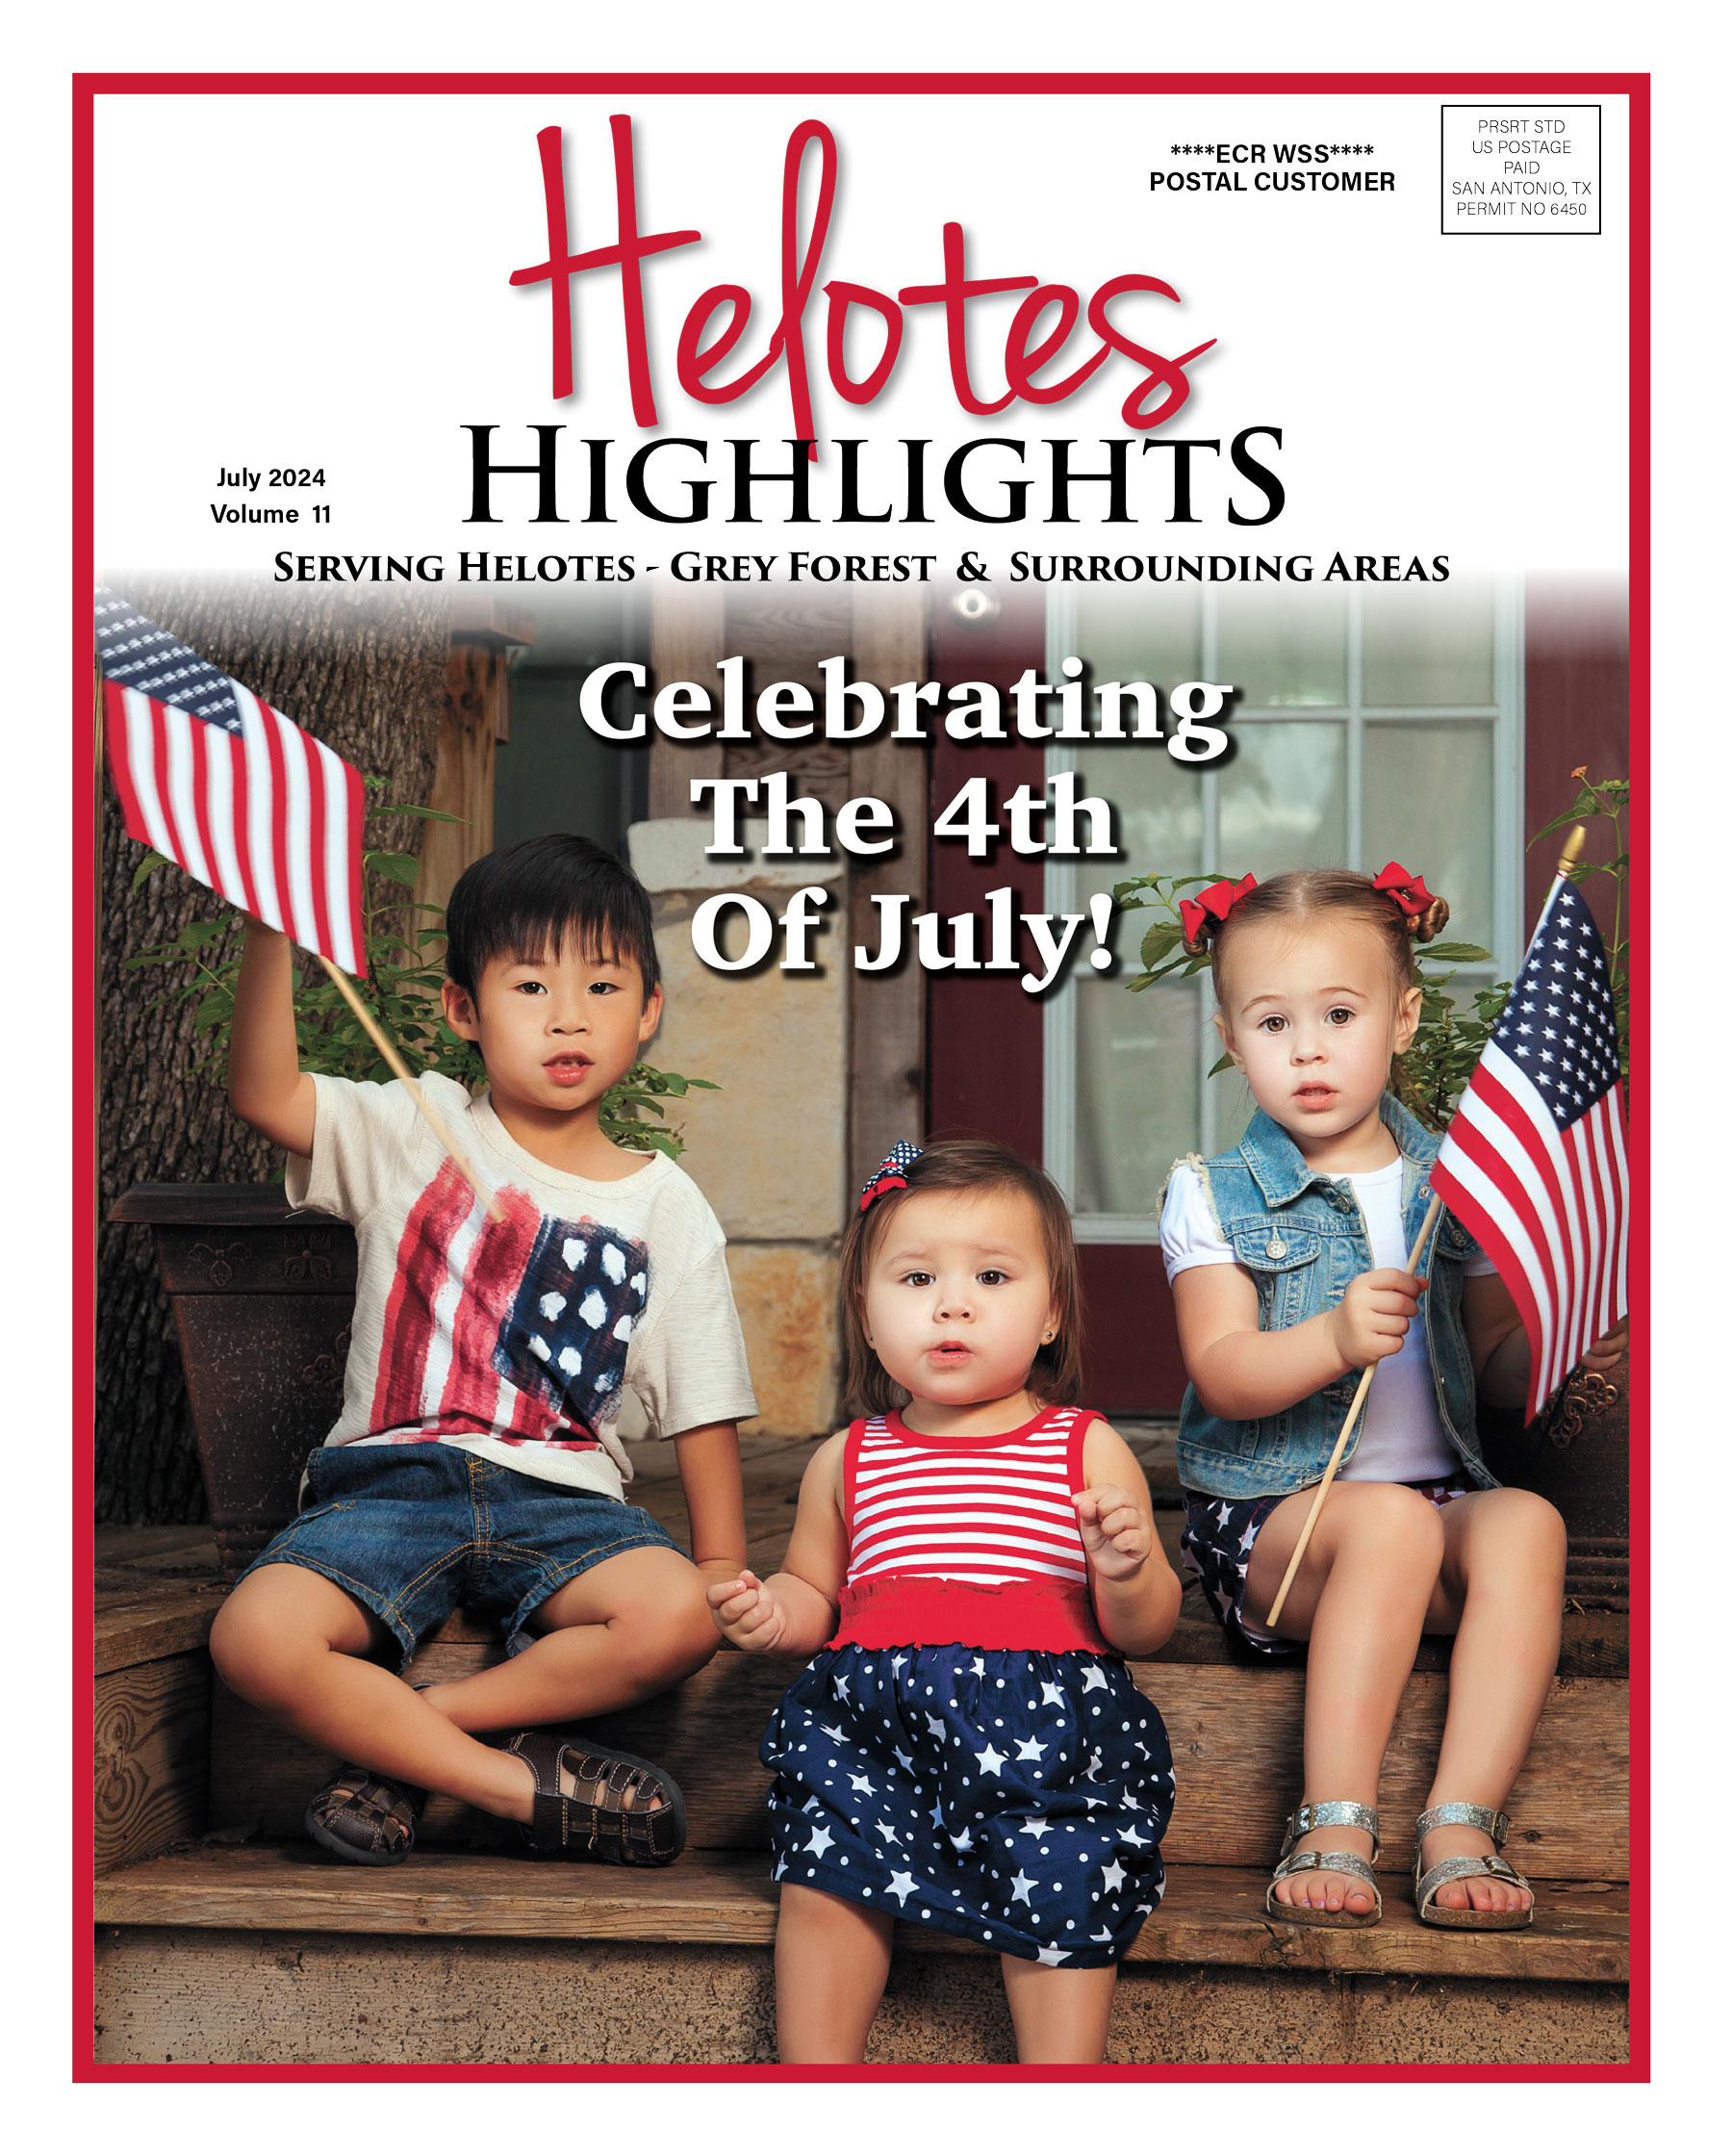 Helotes Highlights July 2024